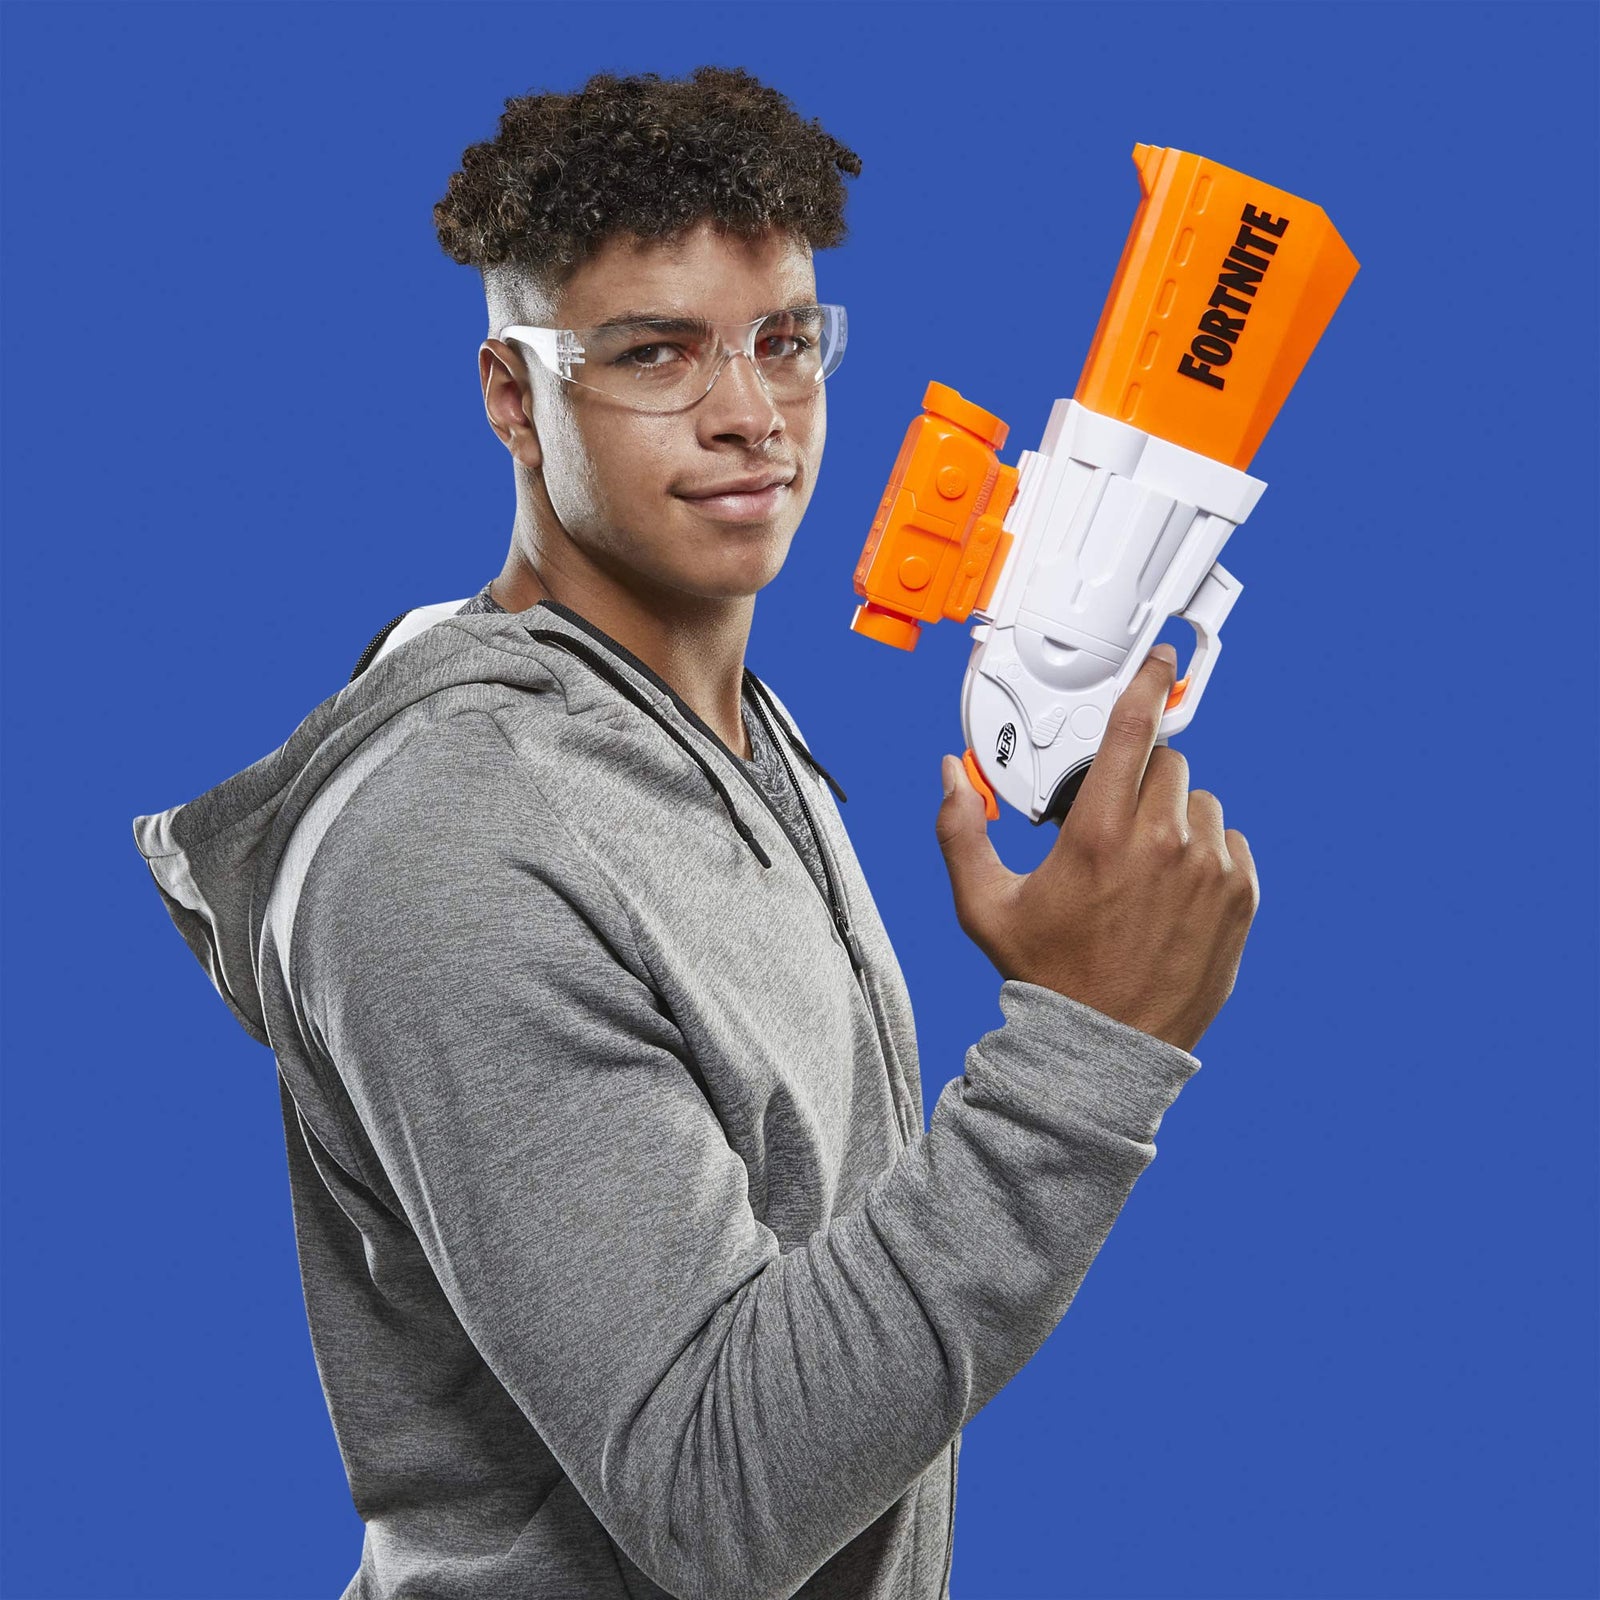 NERF Fortnite SR Blaster -- 4-Dart Hammer Action -- Includes Removable Scope and 8 Official Elite Darts -- for Youth, Teens, Adults